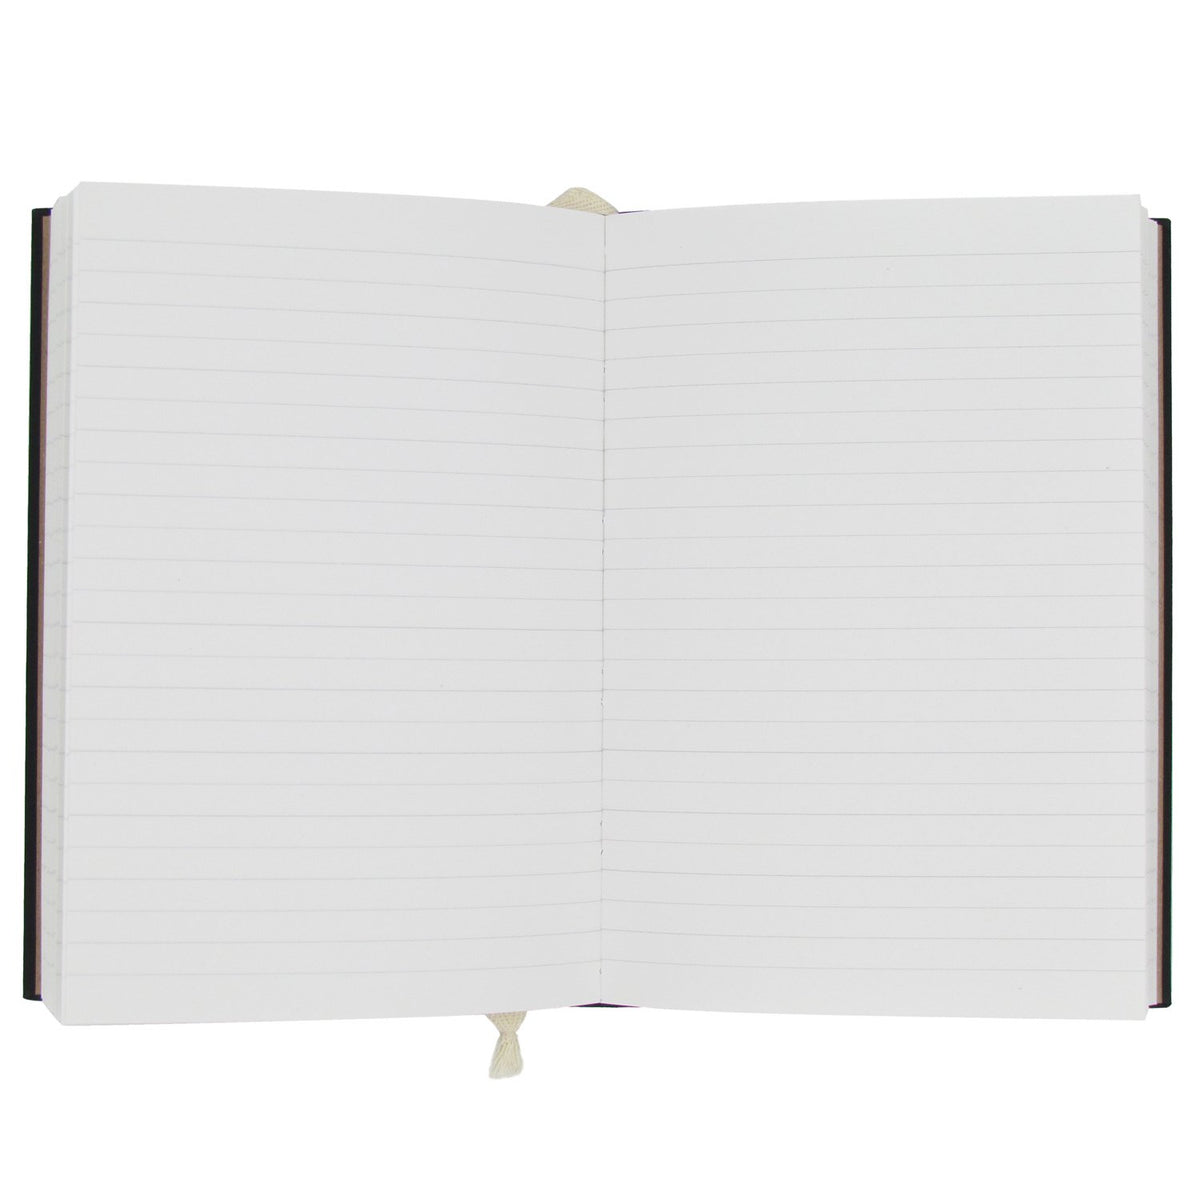 Harmony Eco-Friendly Notebook pages - Black - Made in Britain - BRIT LOCKER